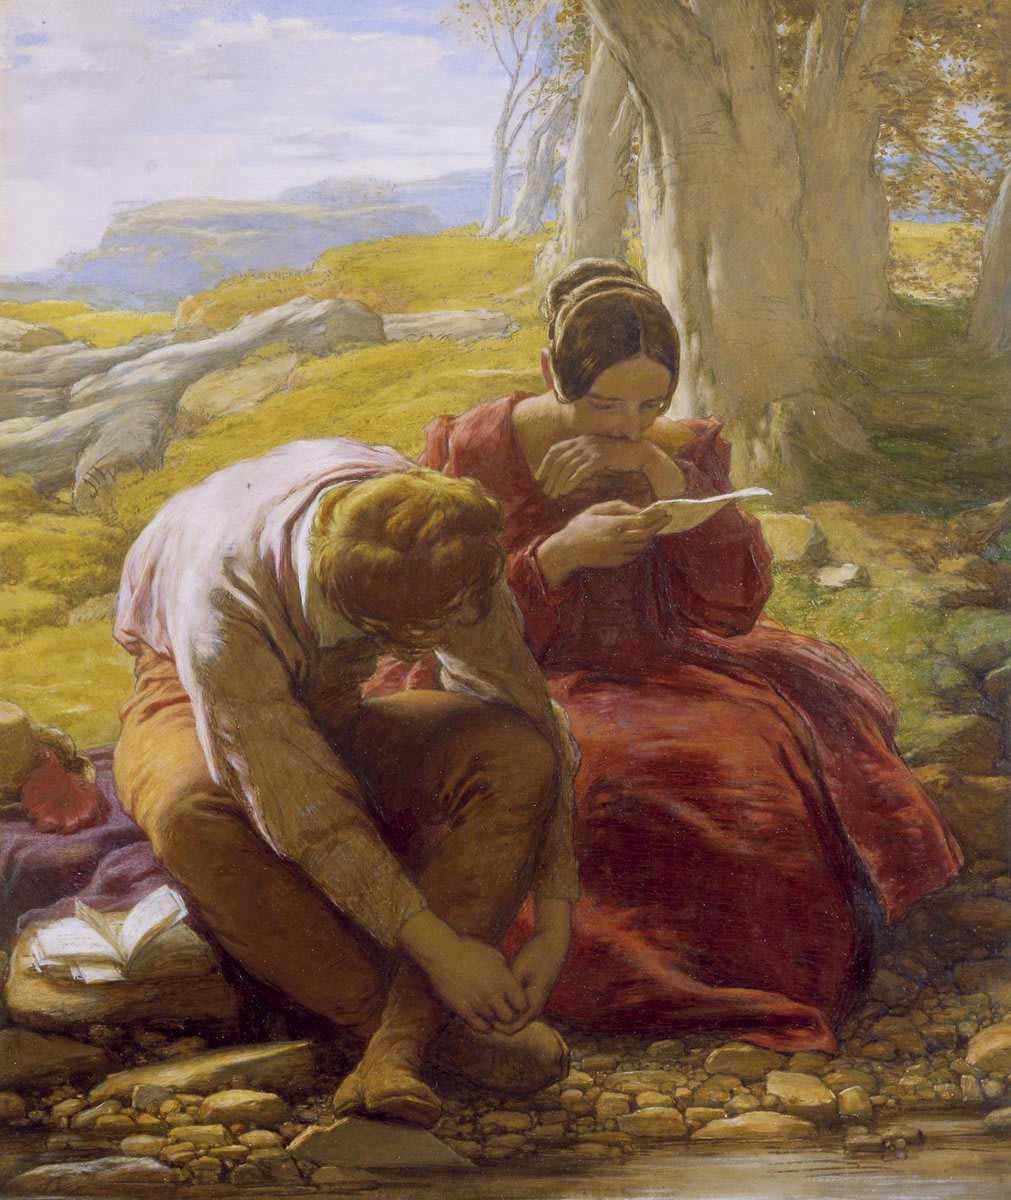 Forget dating apps, this is how you woo someone! The Sonnet is one of William Mulready's most popular works. The young man is courting the girl, and has written a poem for her as a token of his love.